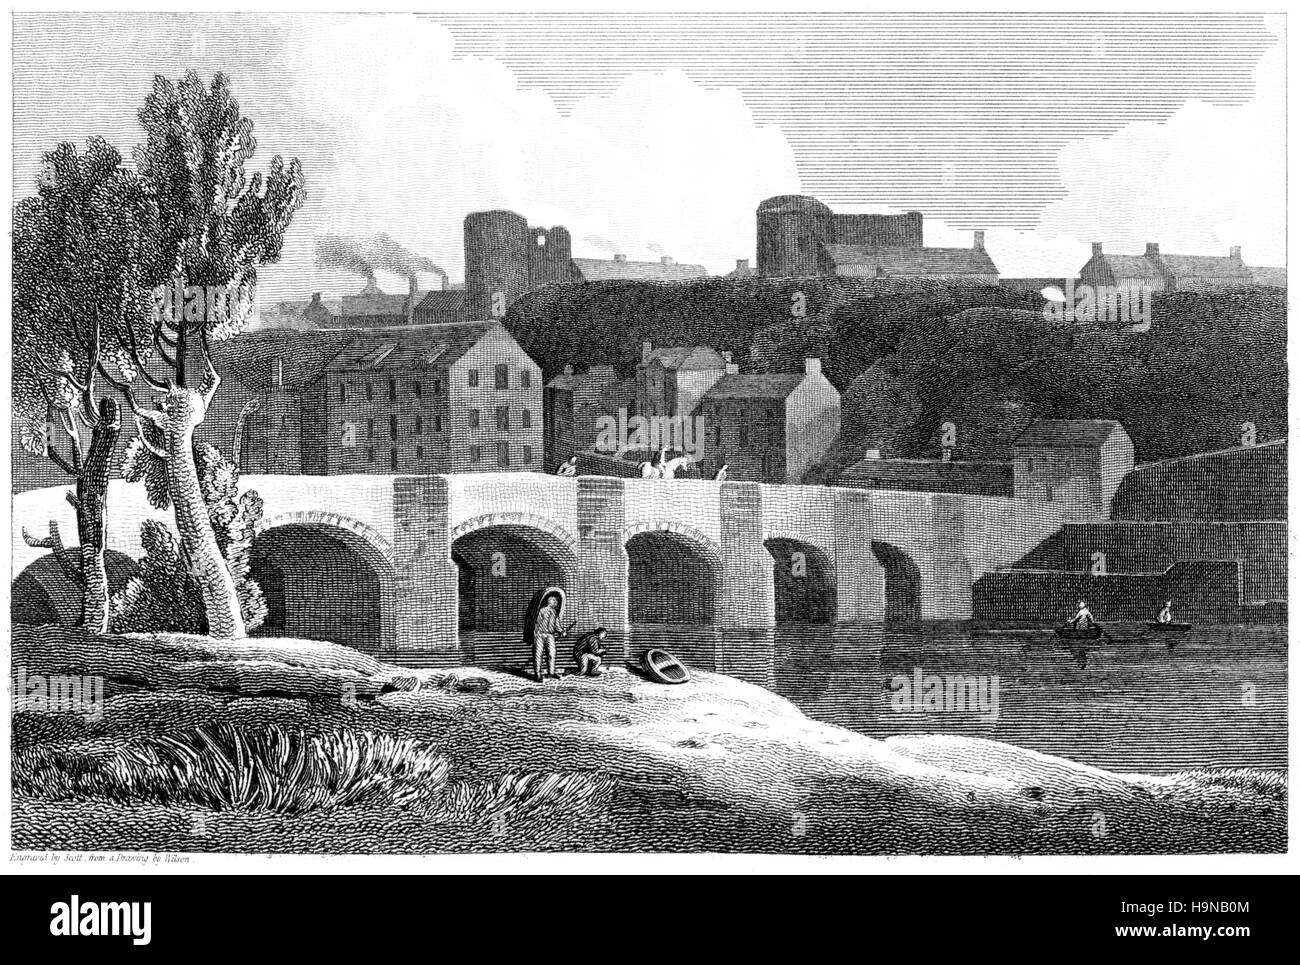 An engraving of Caermarthen (Carmarthen) Wales UK scanned at high resolution from a book printed in 1812. Believed copyright free. Stock Photo